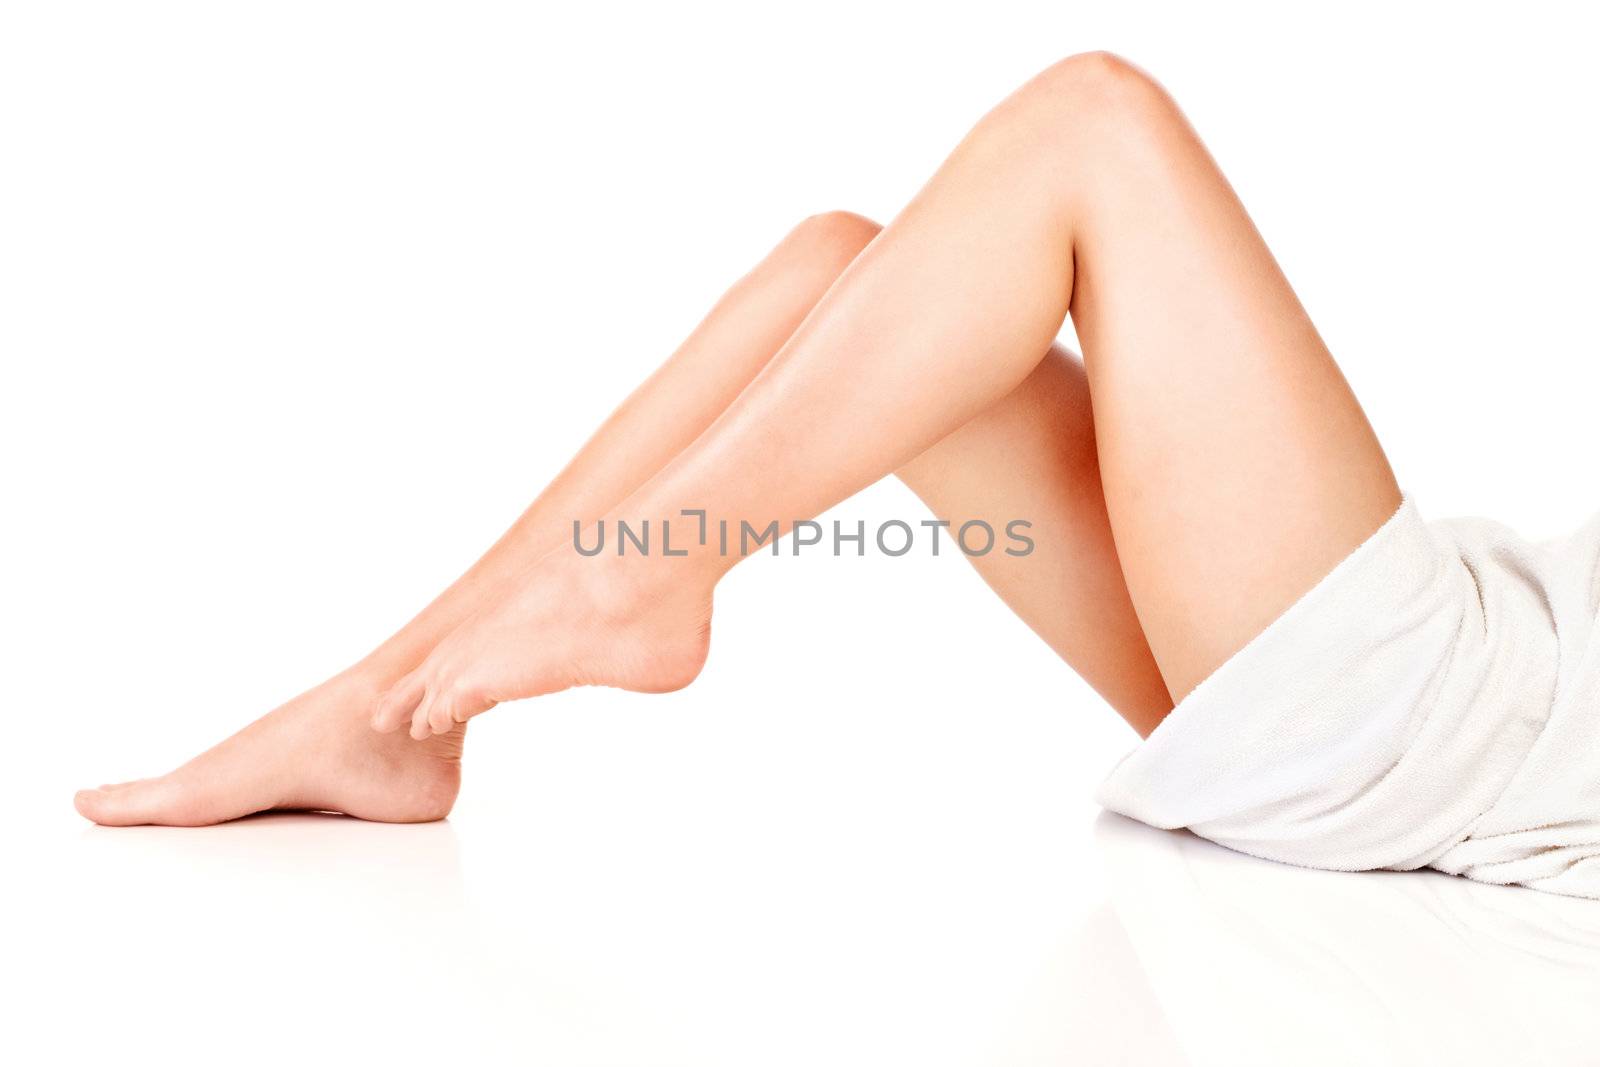 female legs and towel by imarin